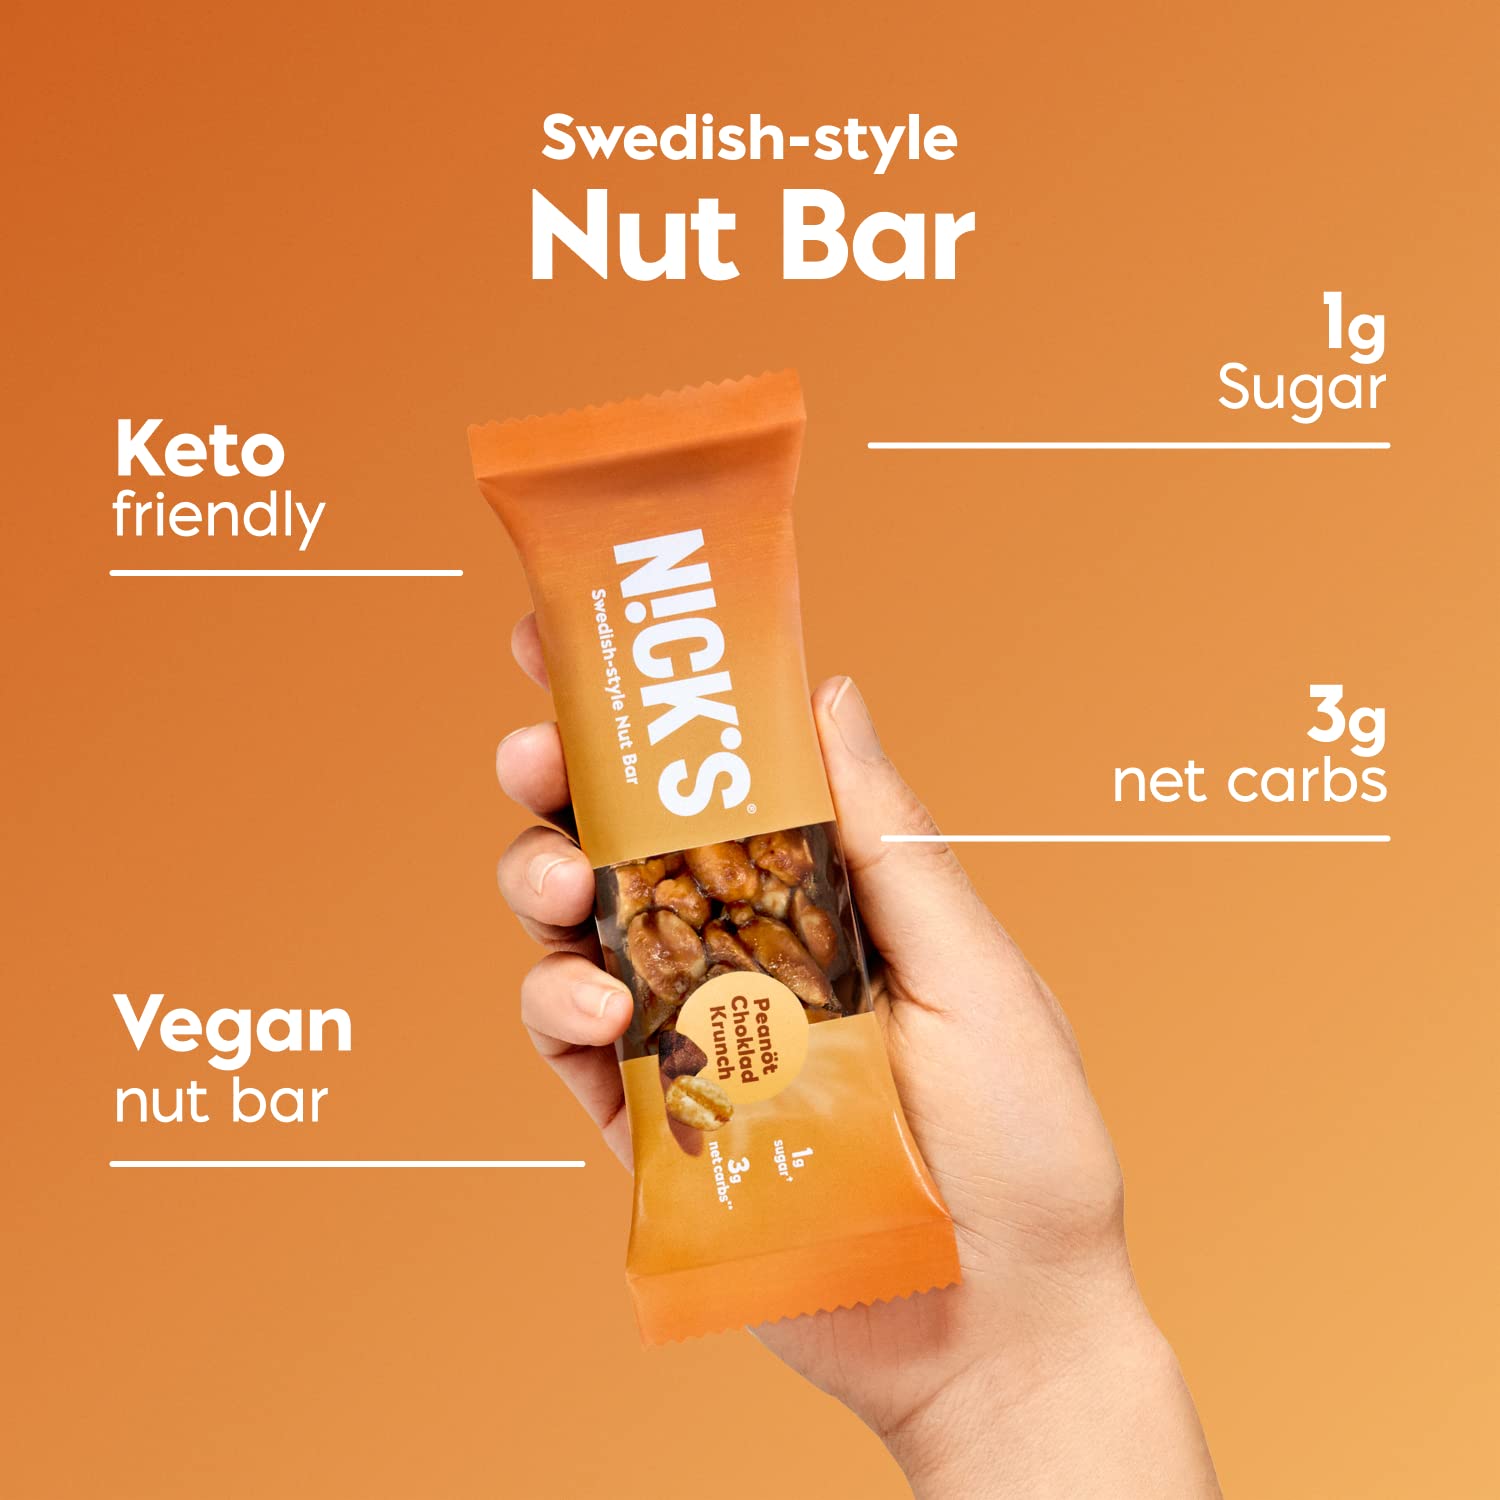 NICK'S Peanut Chocolate Snack Bar, Keto Nut Snack for Sports, Hiking & Outdoor Activities, 1G sugar, 3G net carbs, healthy snack, (pack of 12)